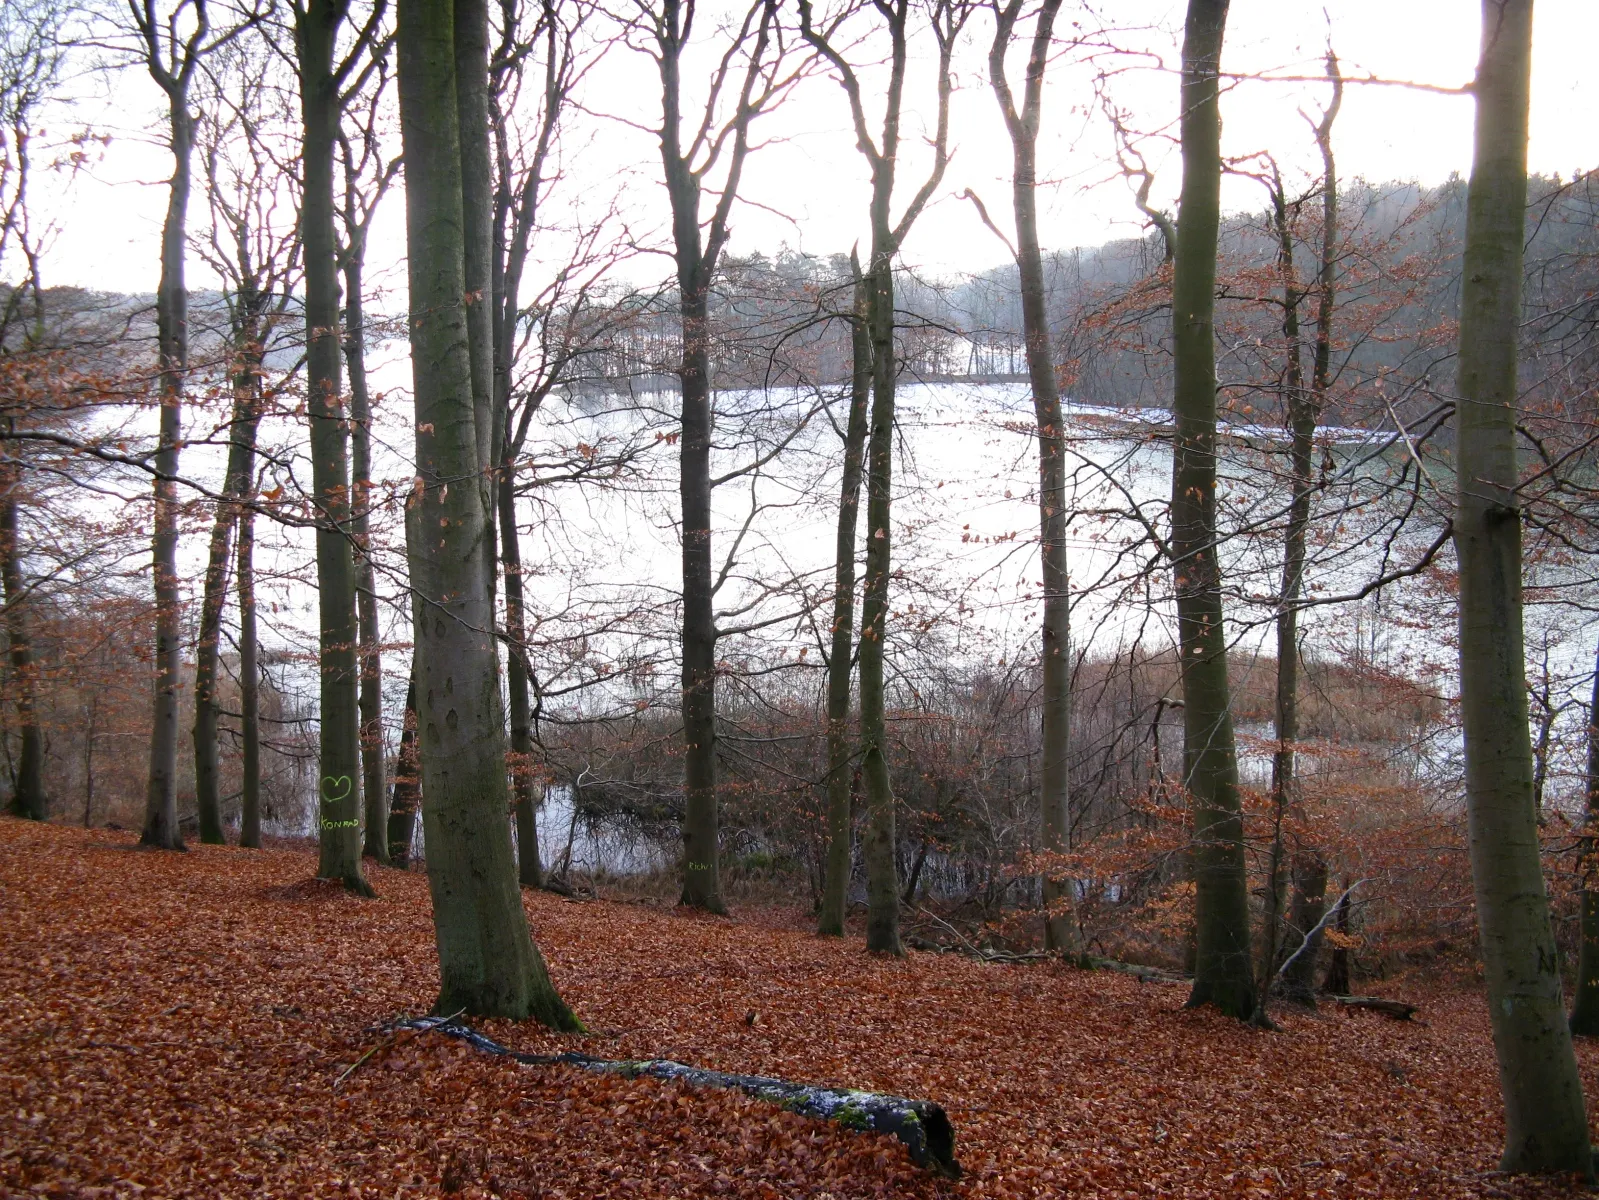 Photo showing: Nothern shore of lake "Neumühler See" in Schwerin, Germany